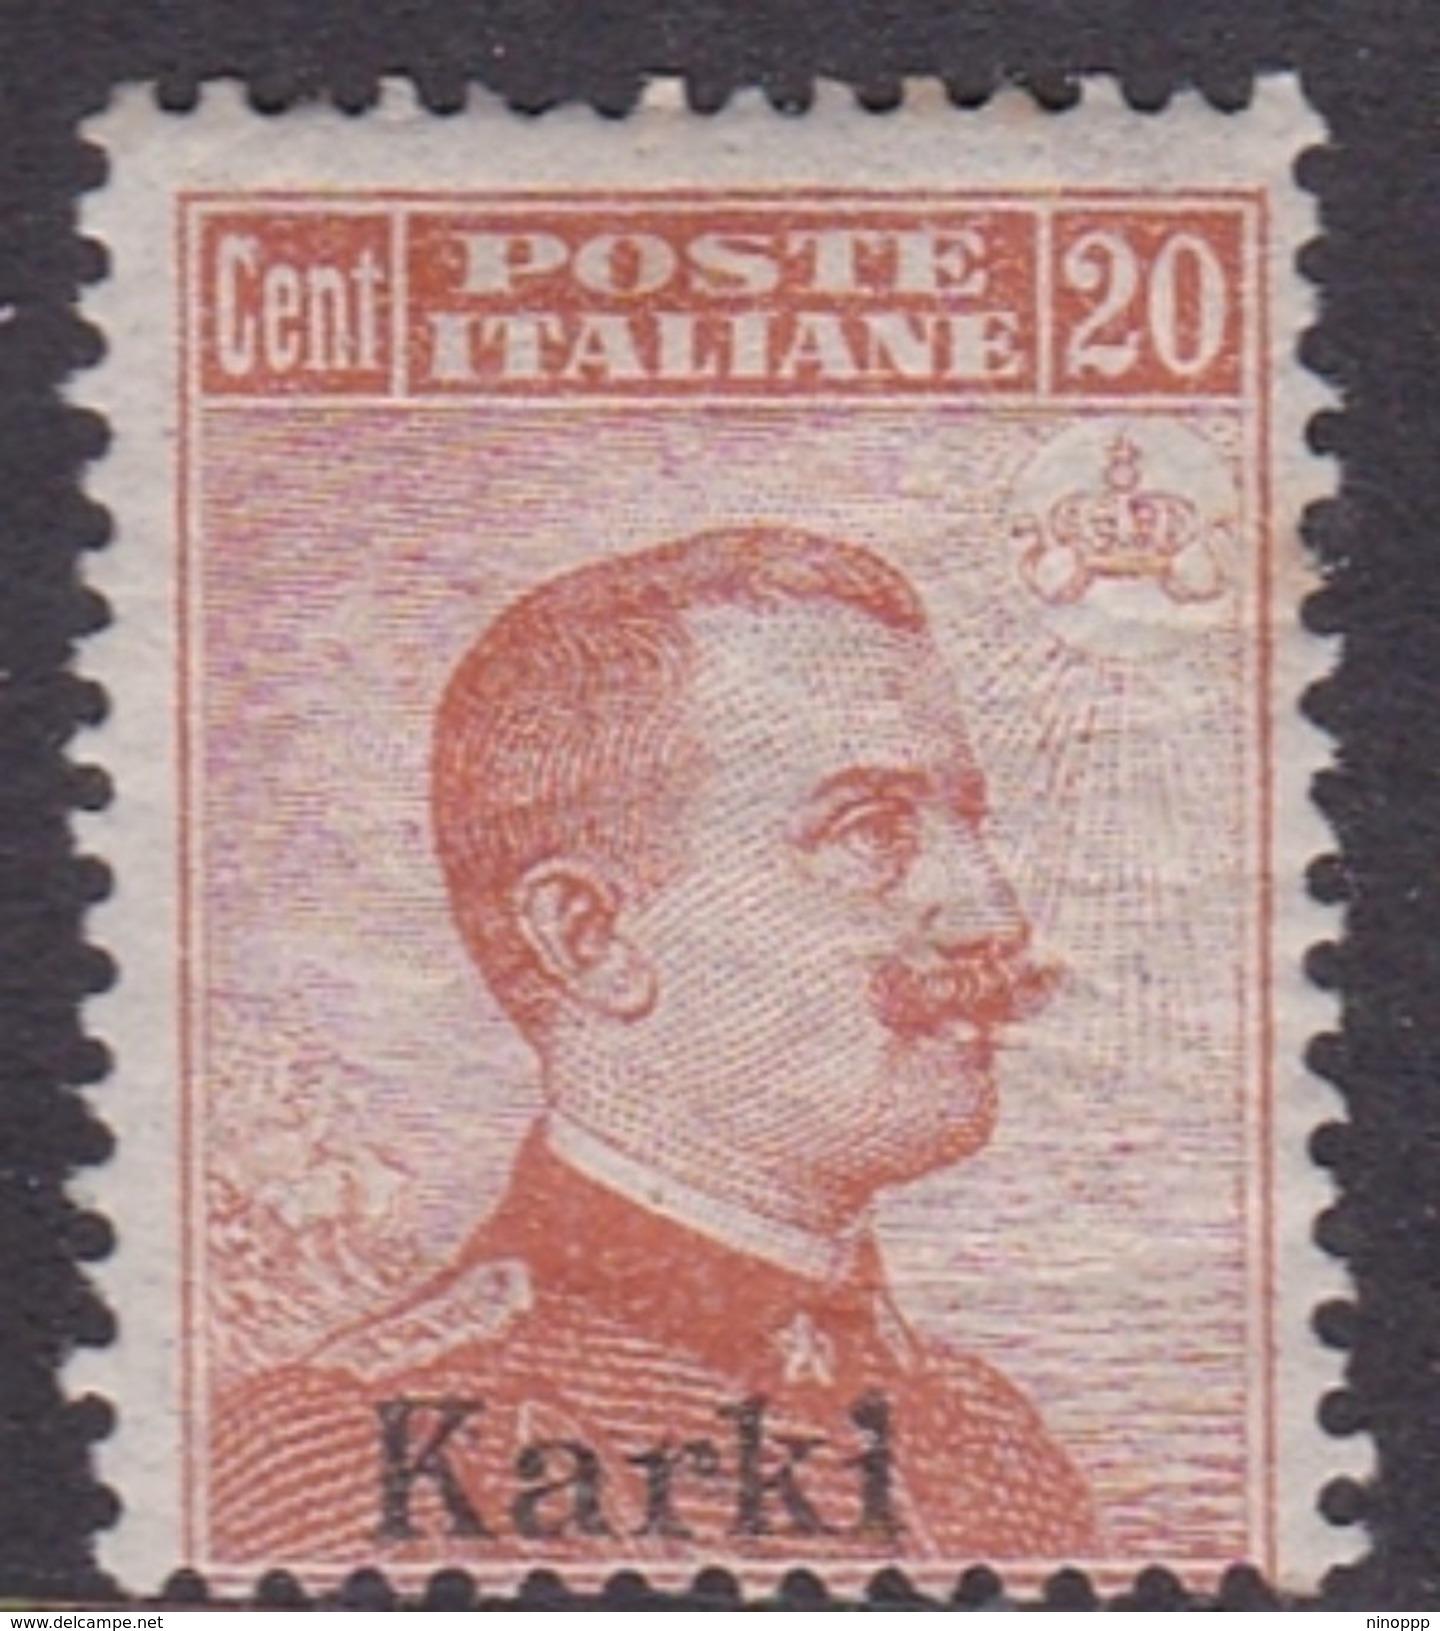 Italy-Colonies And Territories-Aegean-Carchi S 9 1917 20c Brown Orange No Watermark MNH - Egée (Carchi)